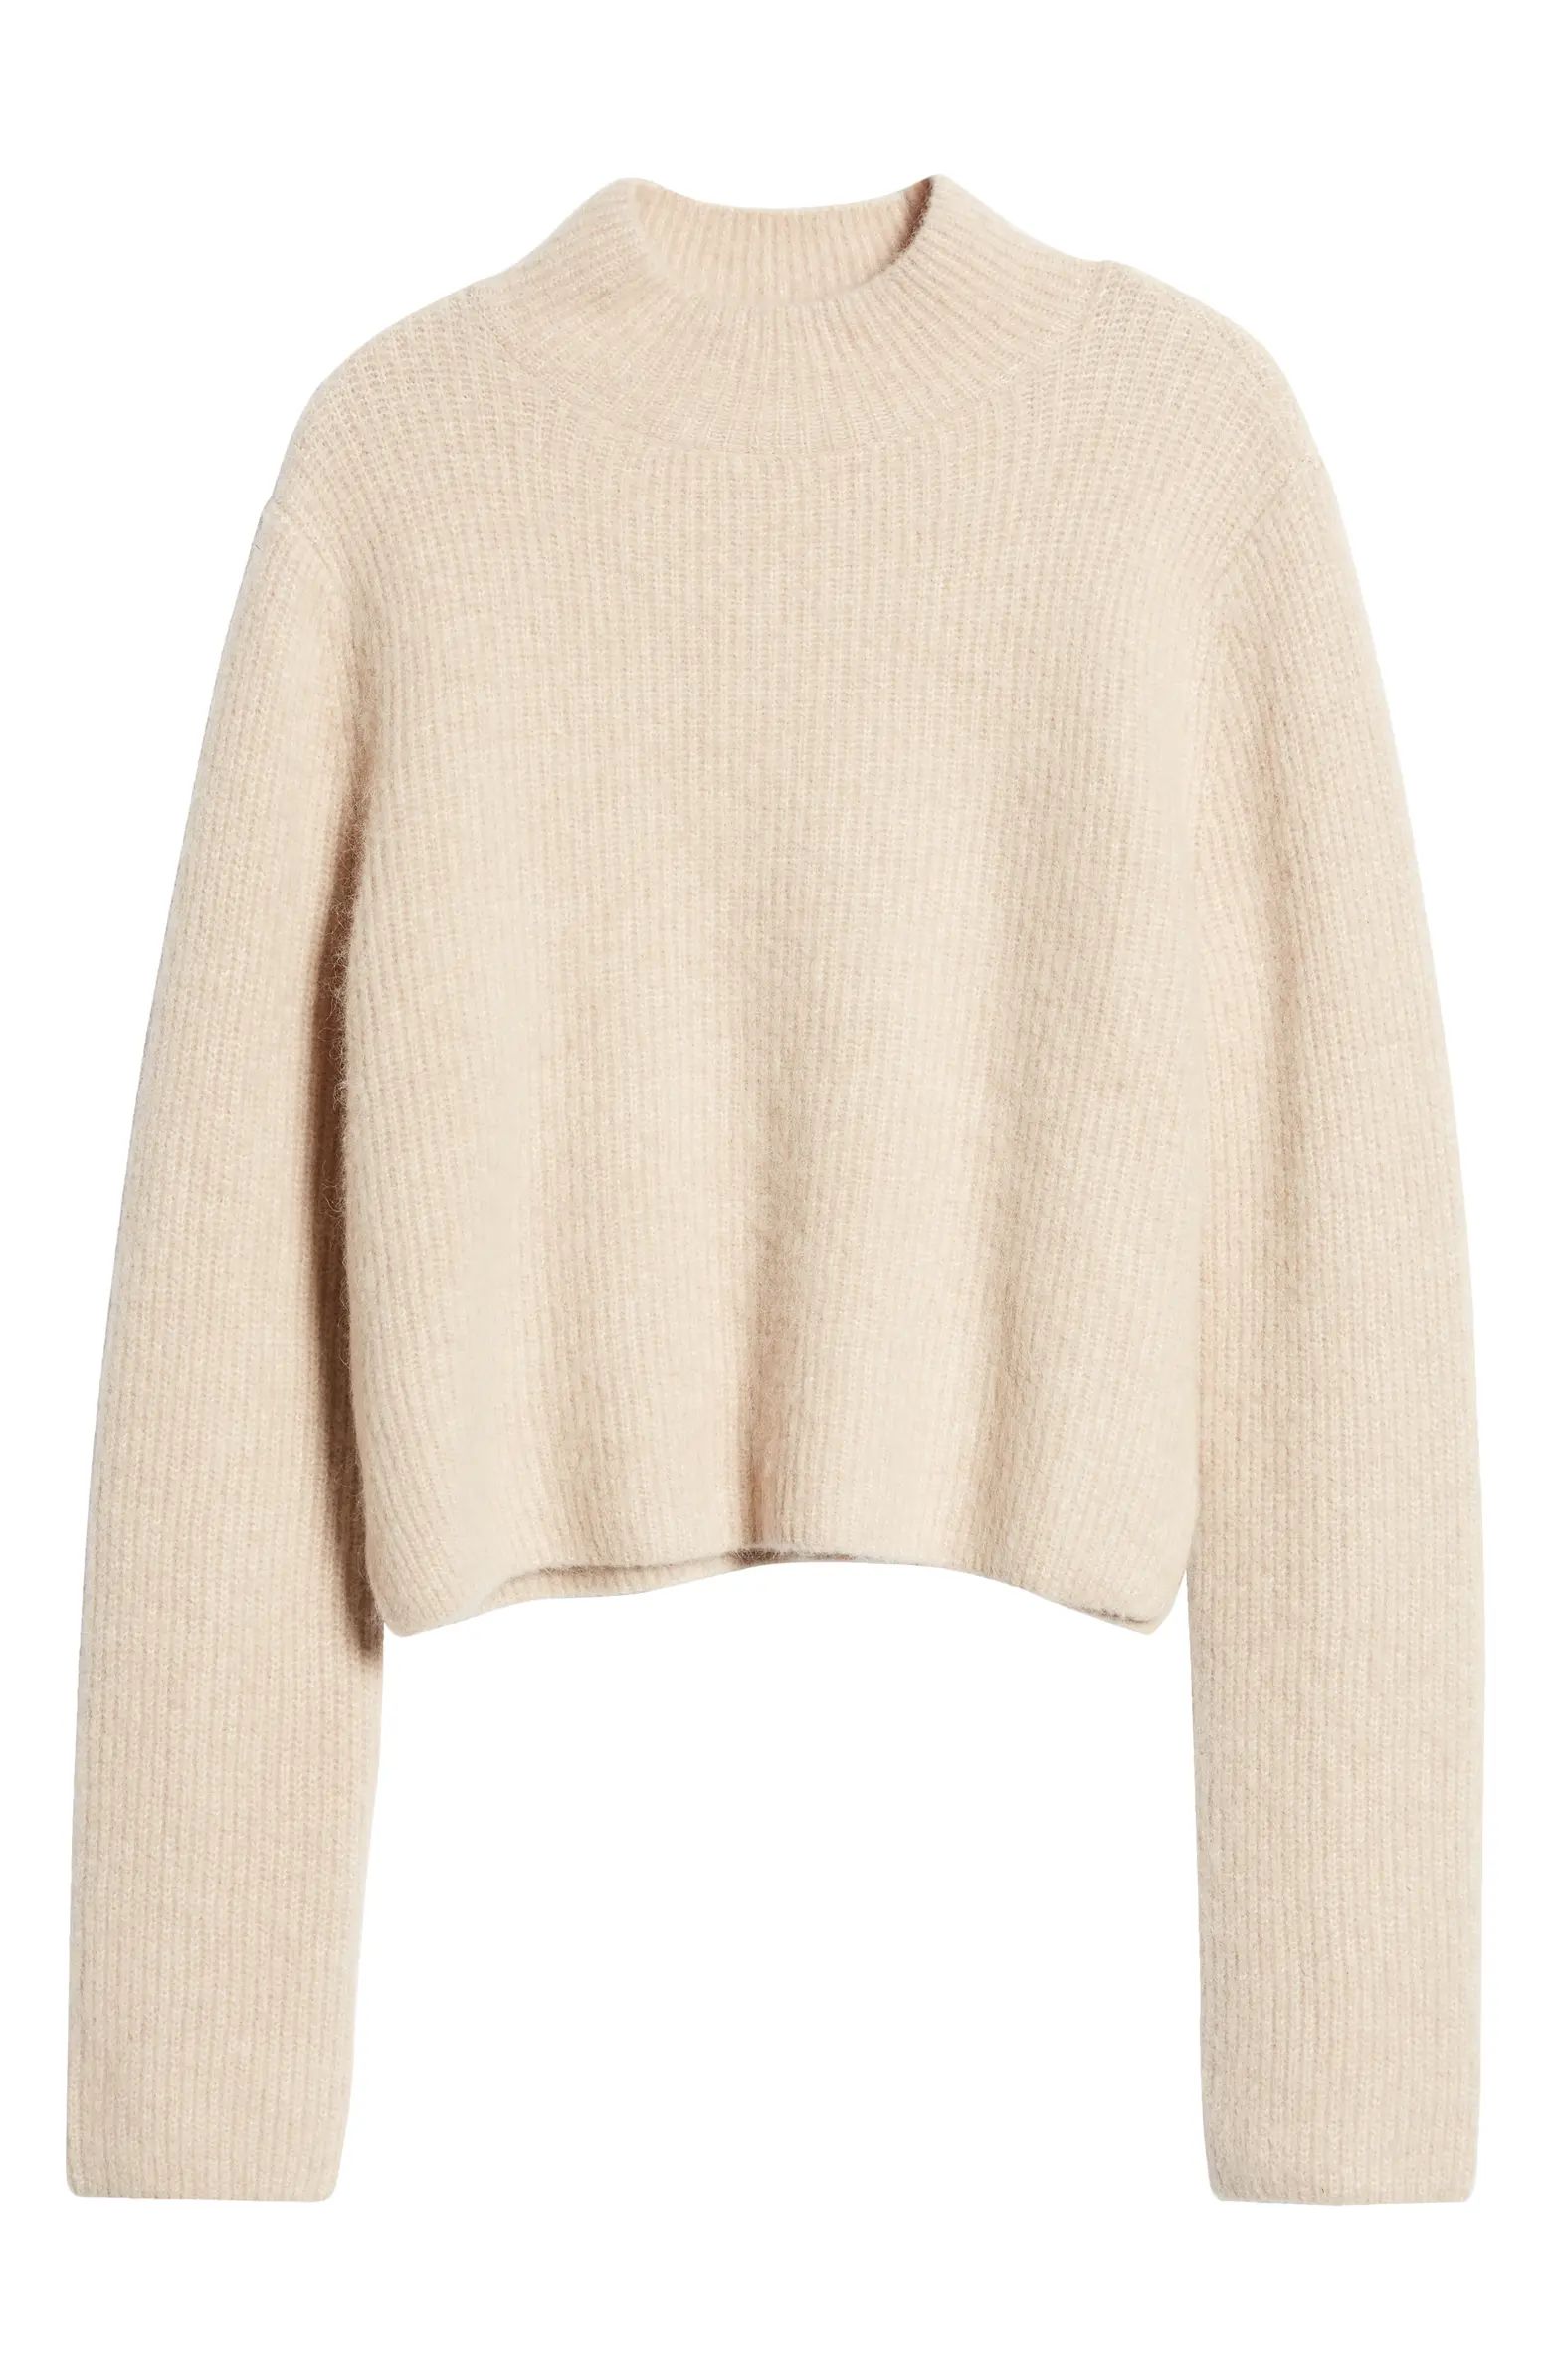 & Other Stories Boxy Mock Neck Rib Sweater | Nordstrom | Nordstrom